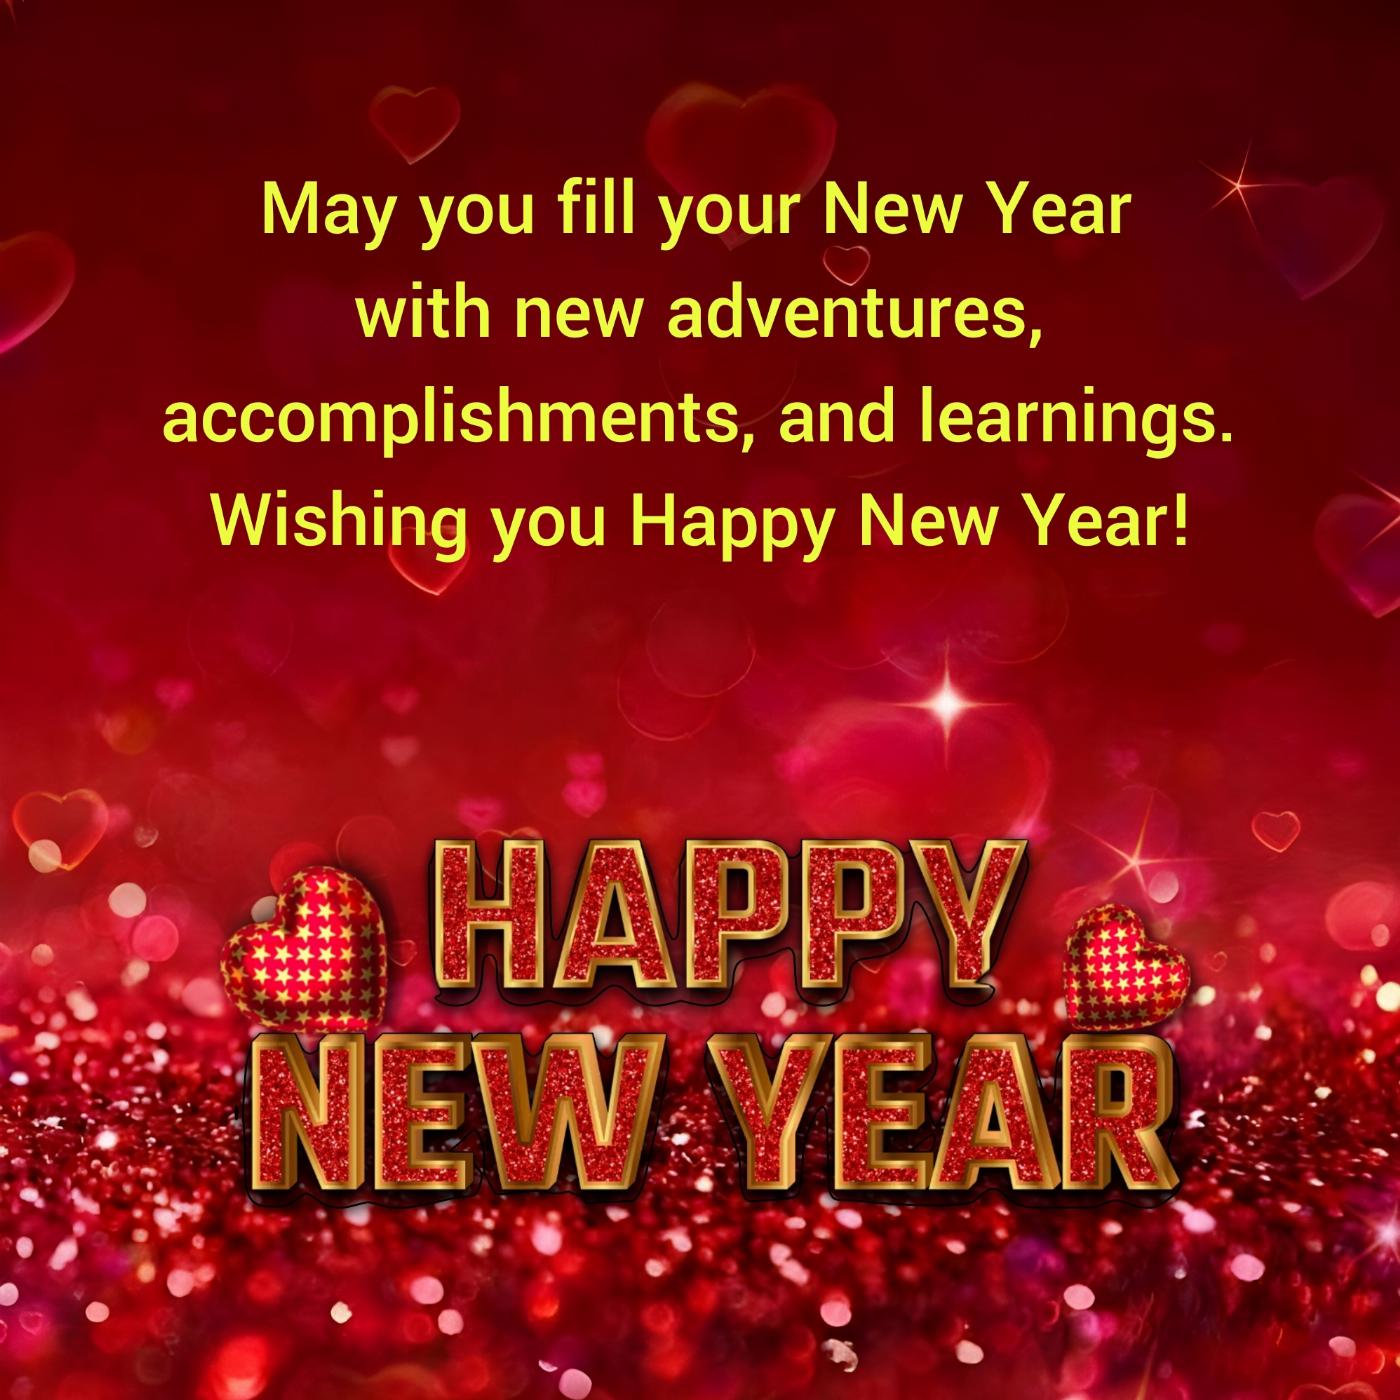 May you fill your New Year with new adventures